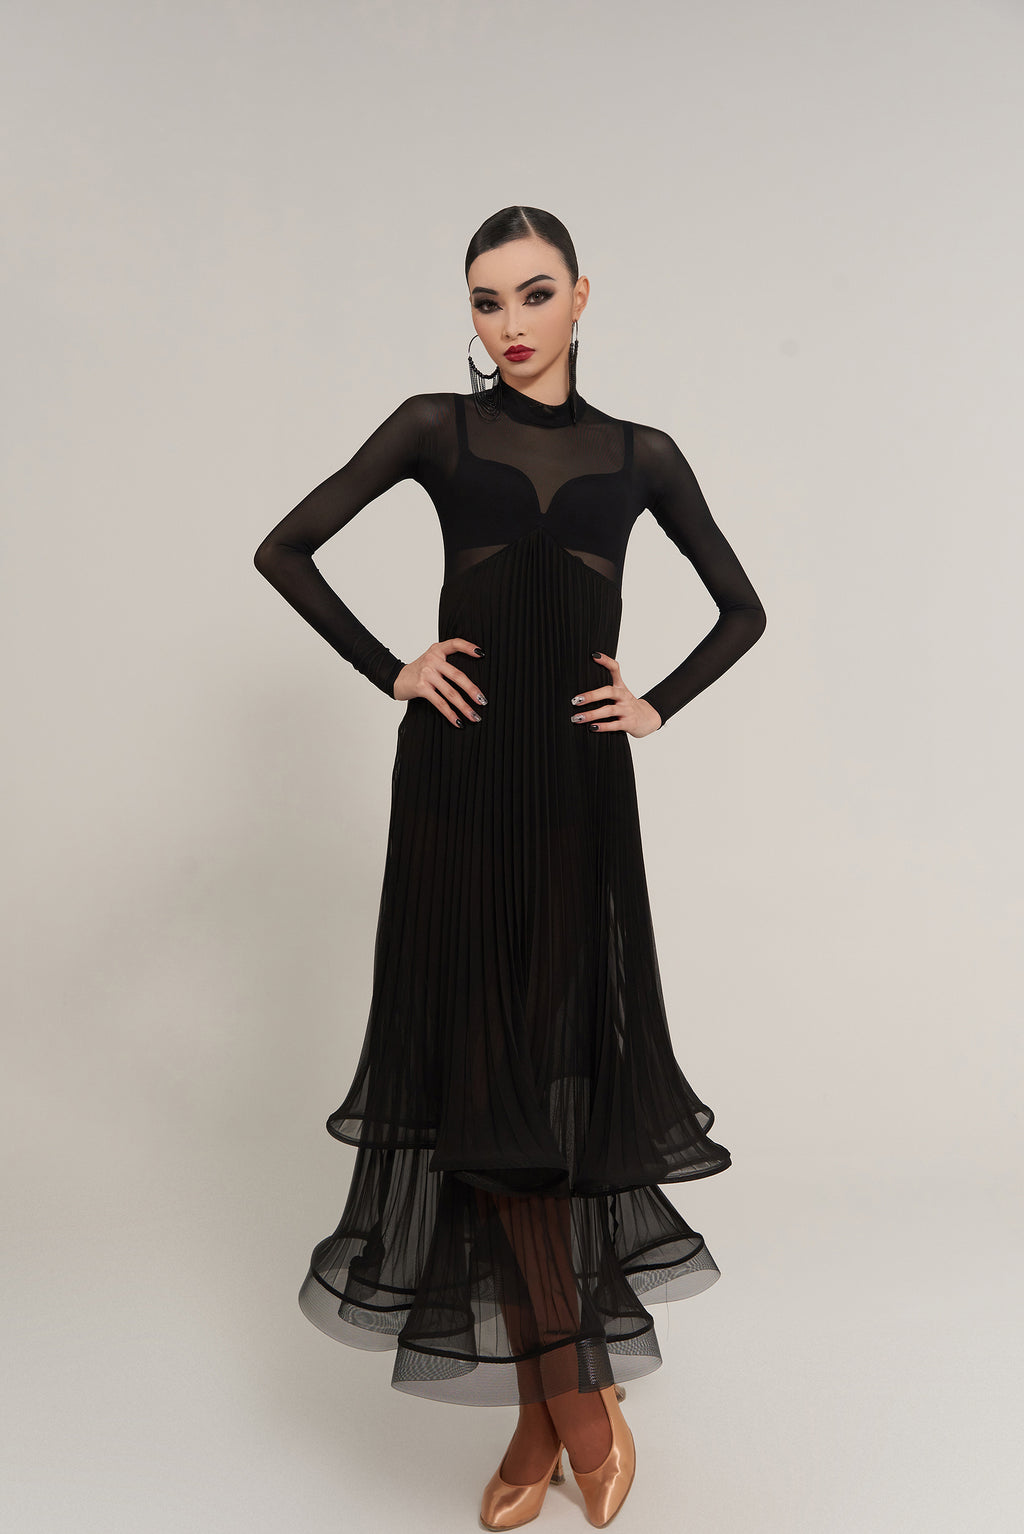 DQ-487-Tailor Made-Black Tulle Ruffle Dress